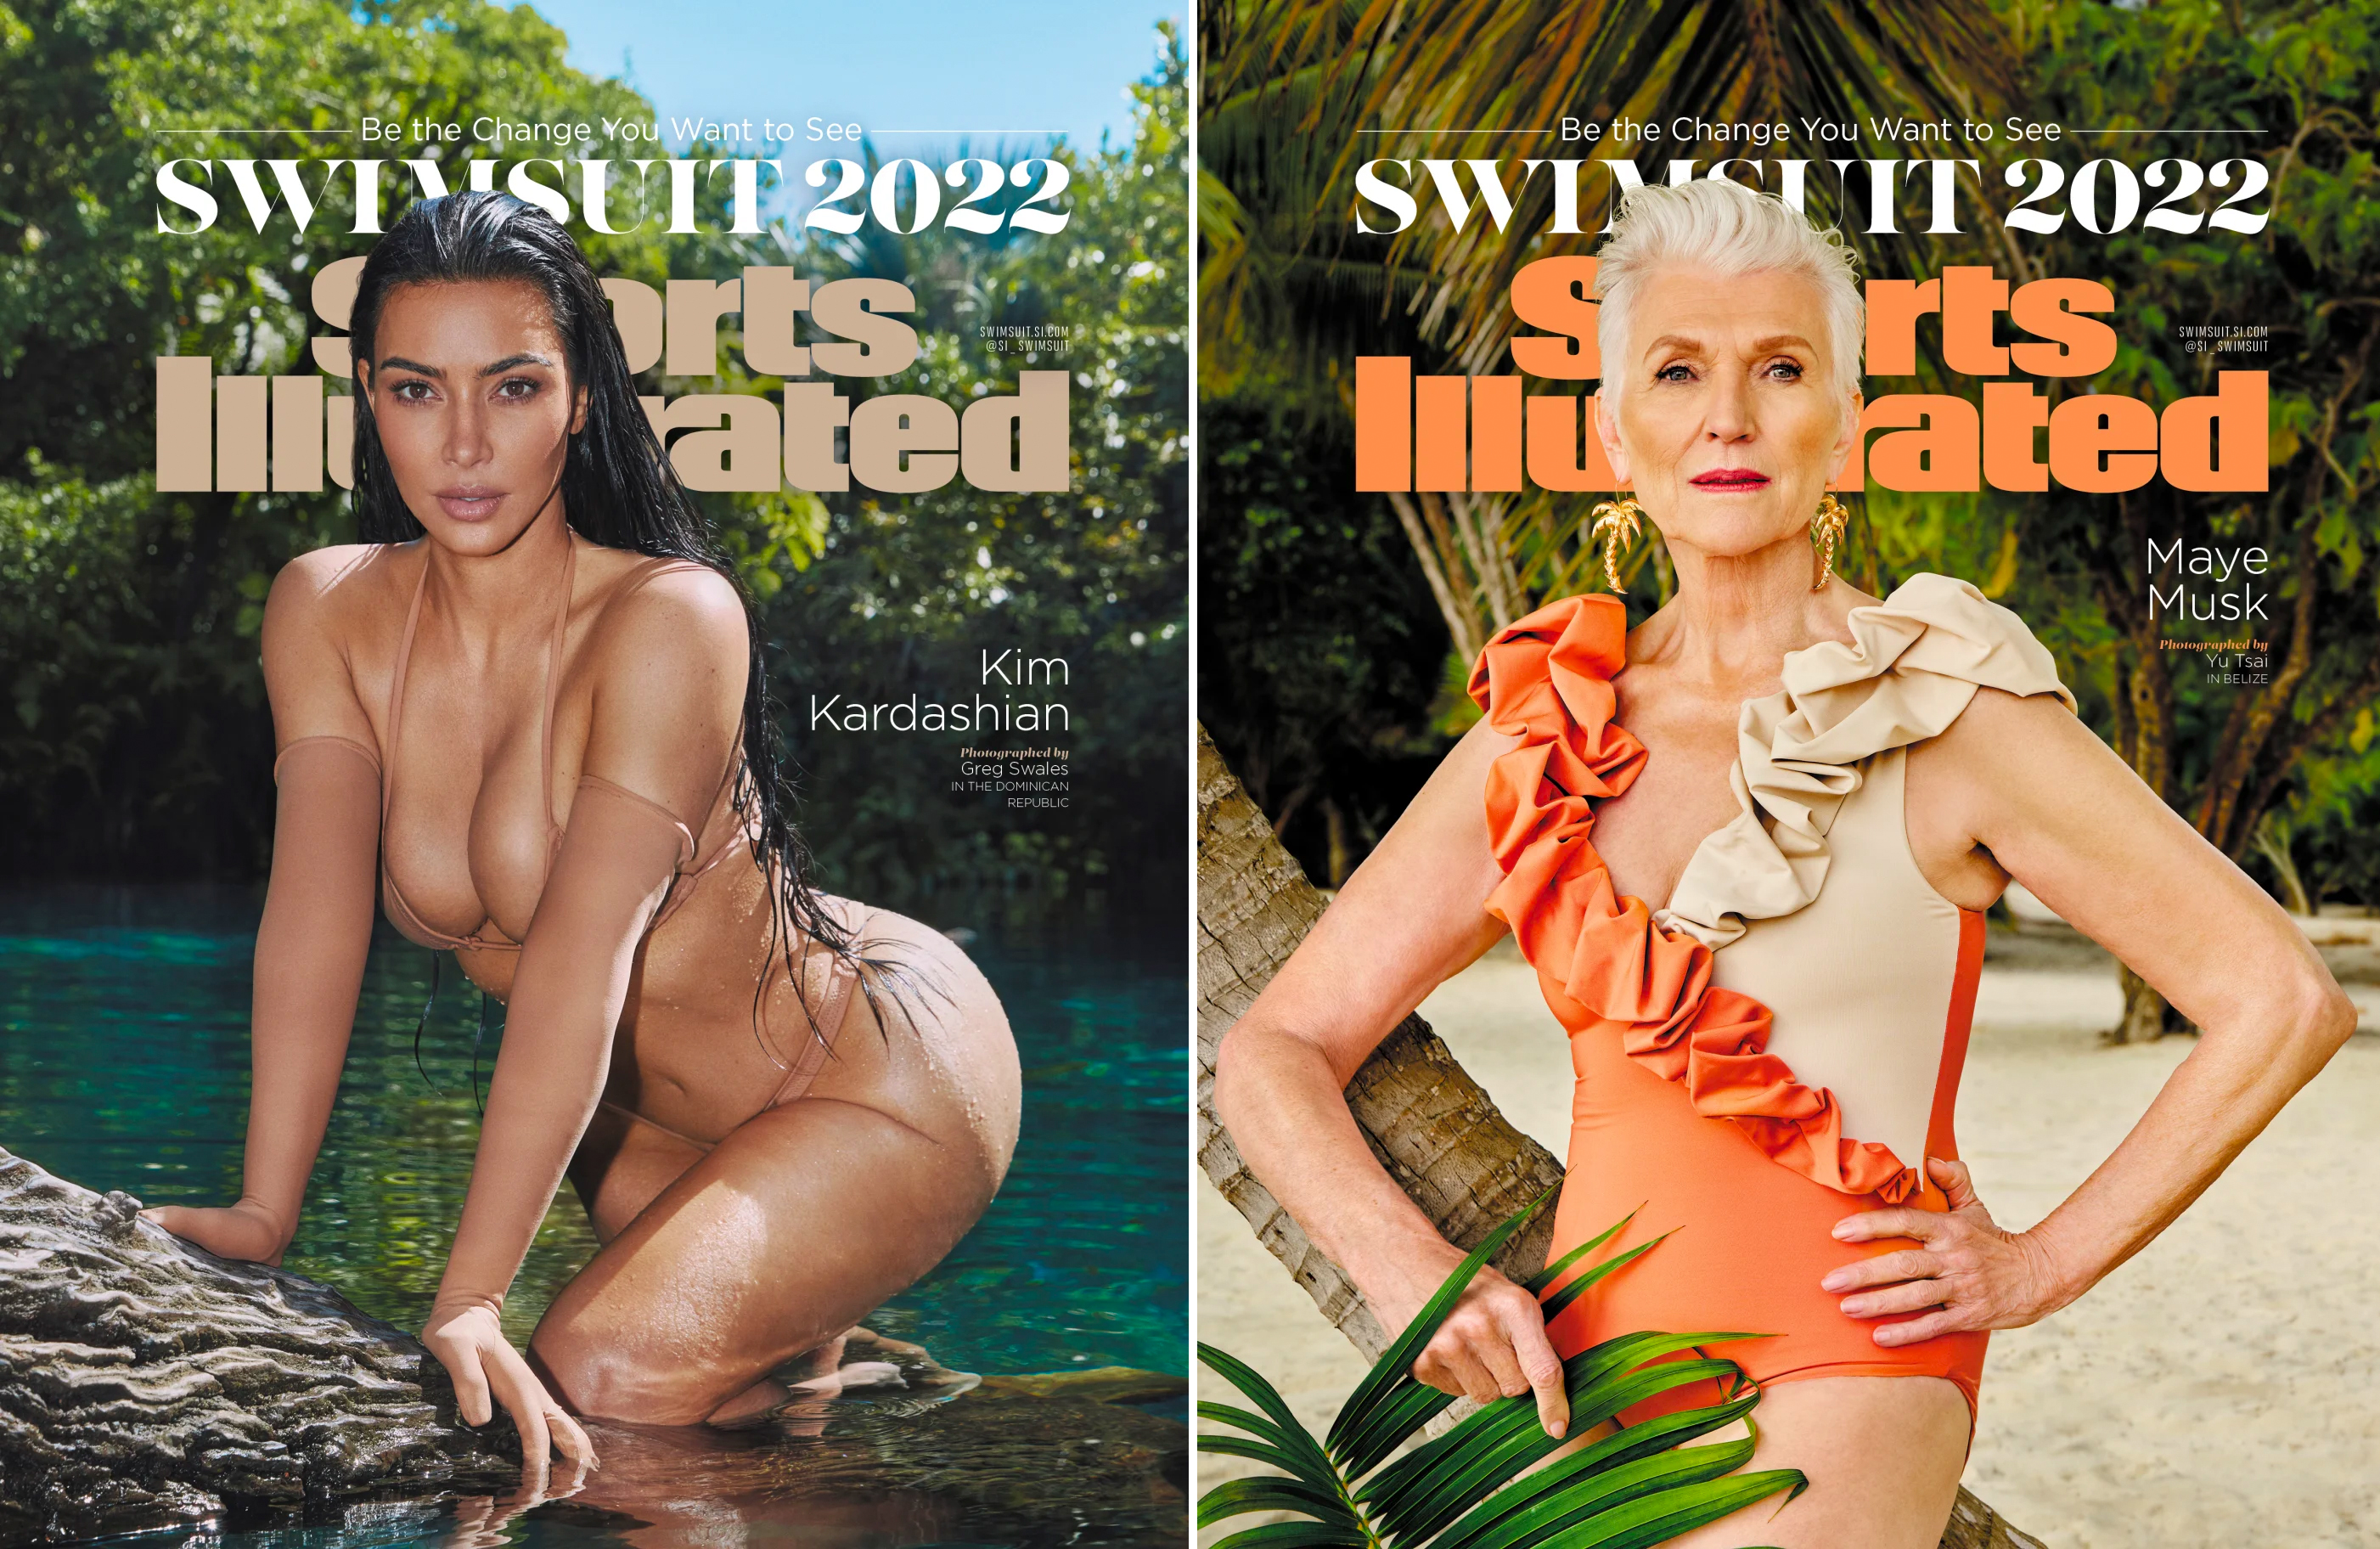 Kim Kardashian lands the cover of Sports Illustrated; speaks to younger self through written letter pic photo